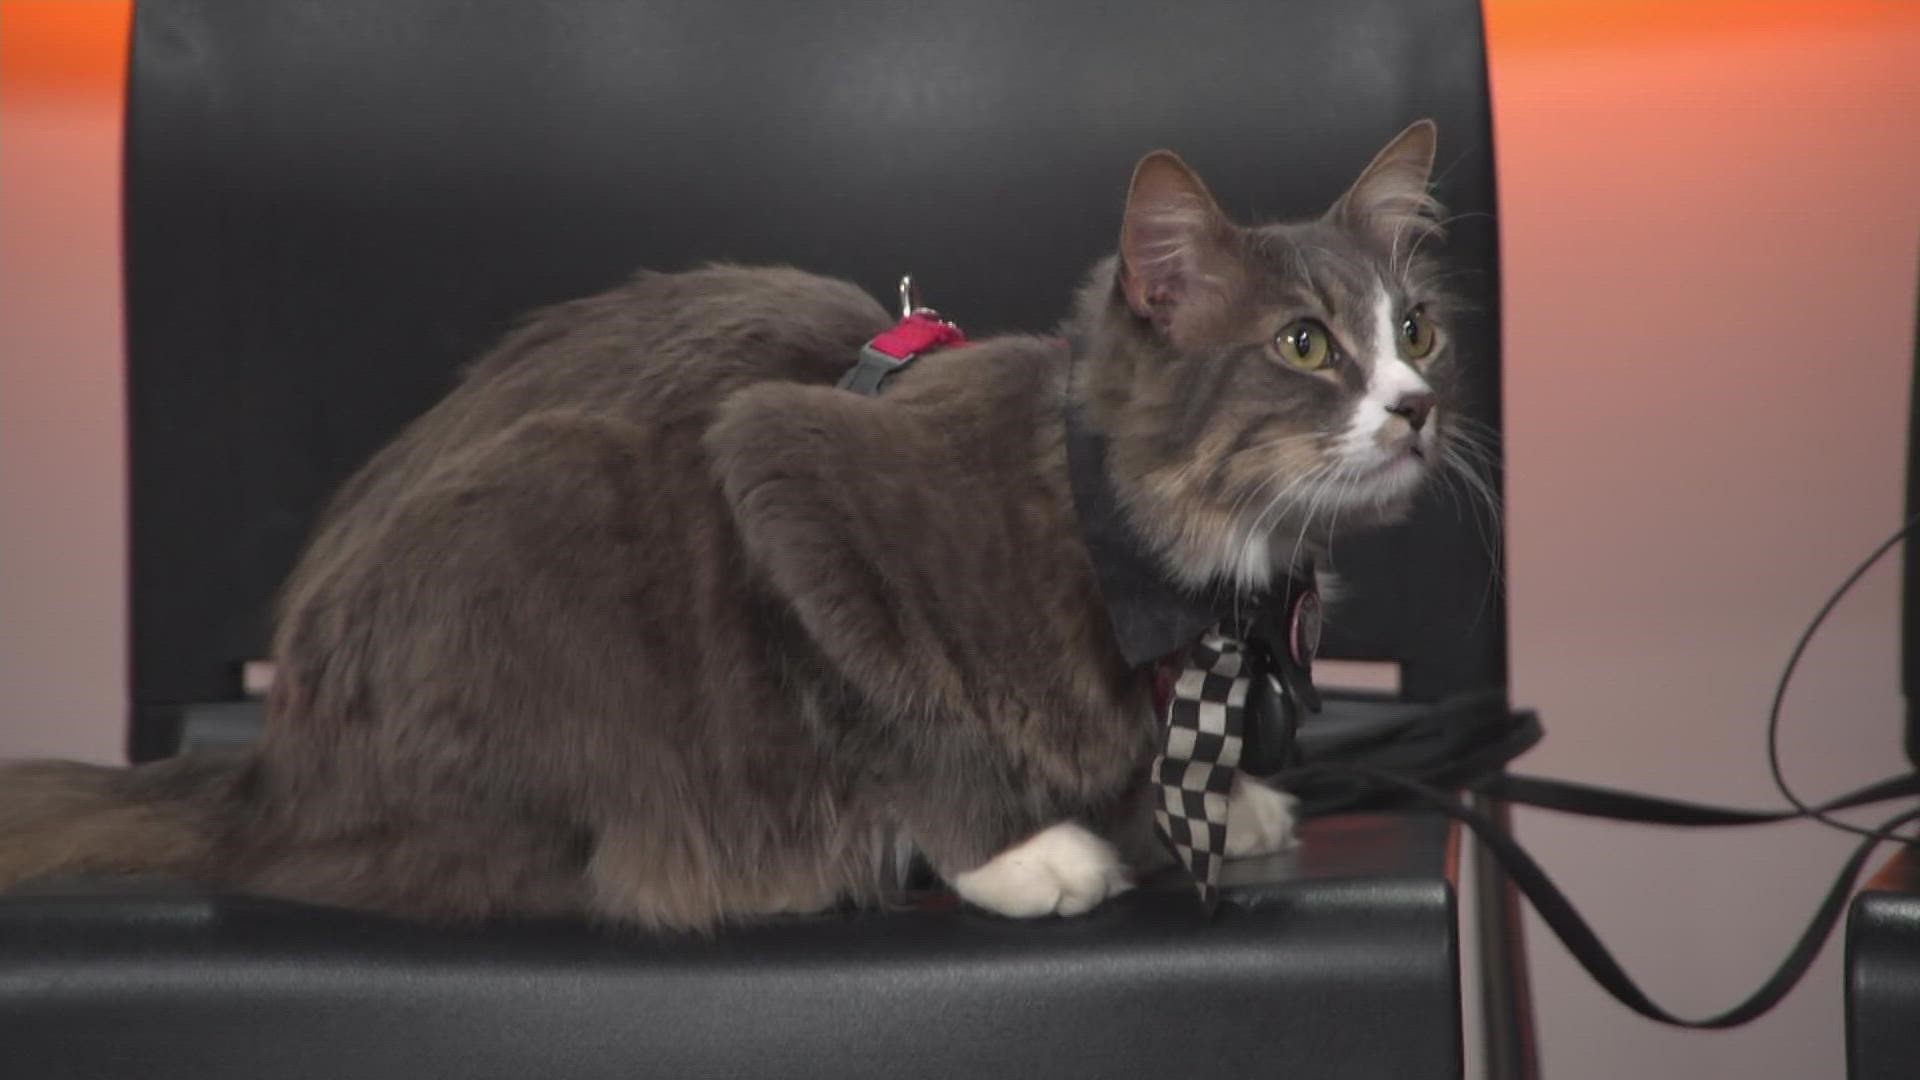 Denali Gato the Adventure cat stops by 9NEWS ahead of the 2022 Cat Fest Colorado at National Western Center in Denver, Colo.